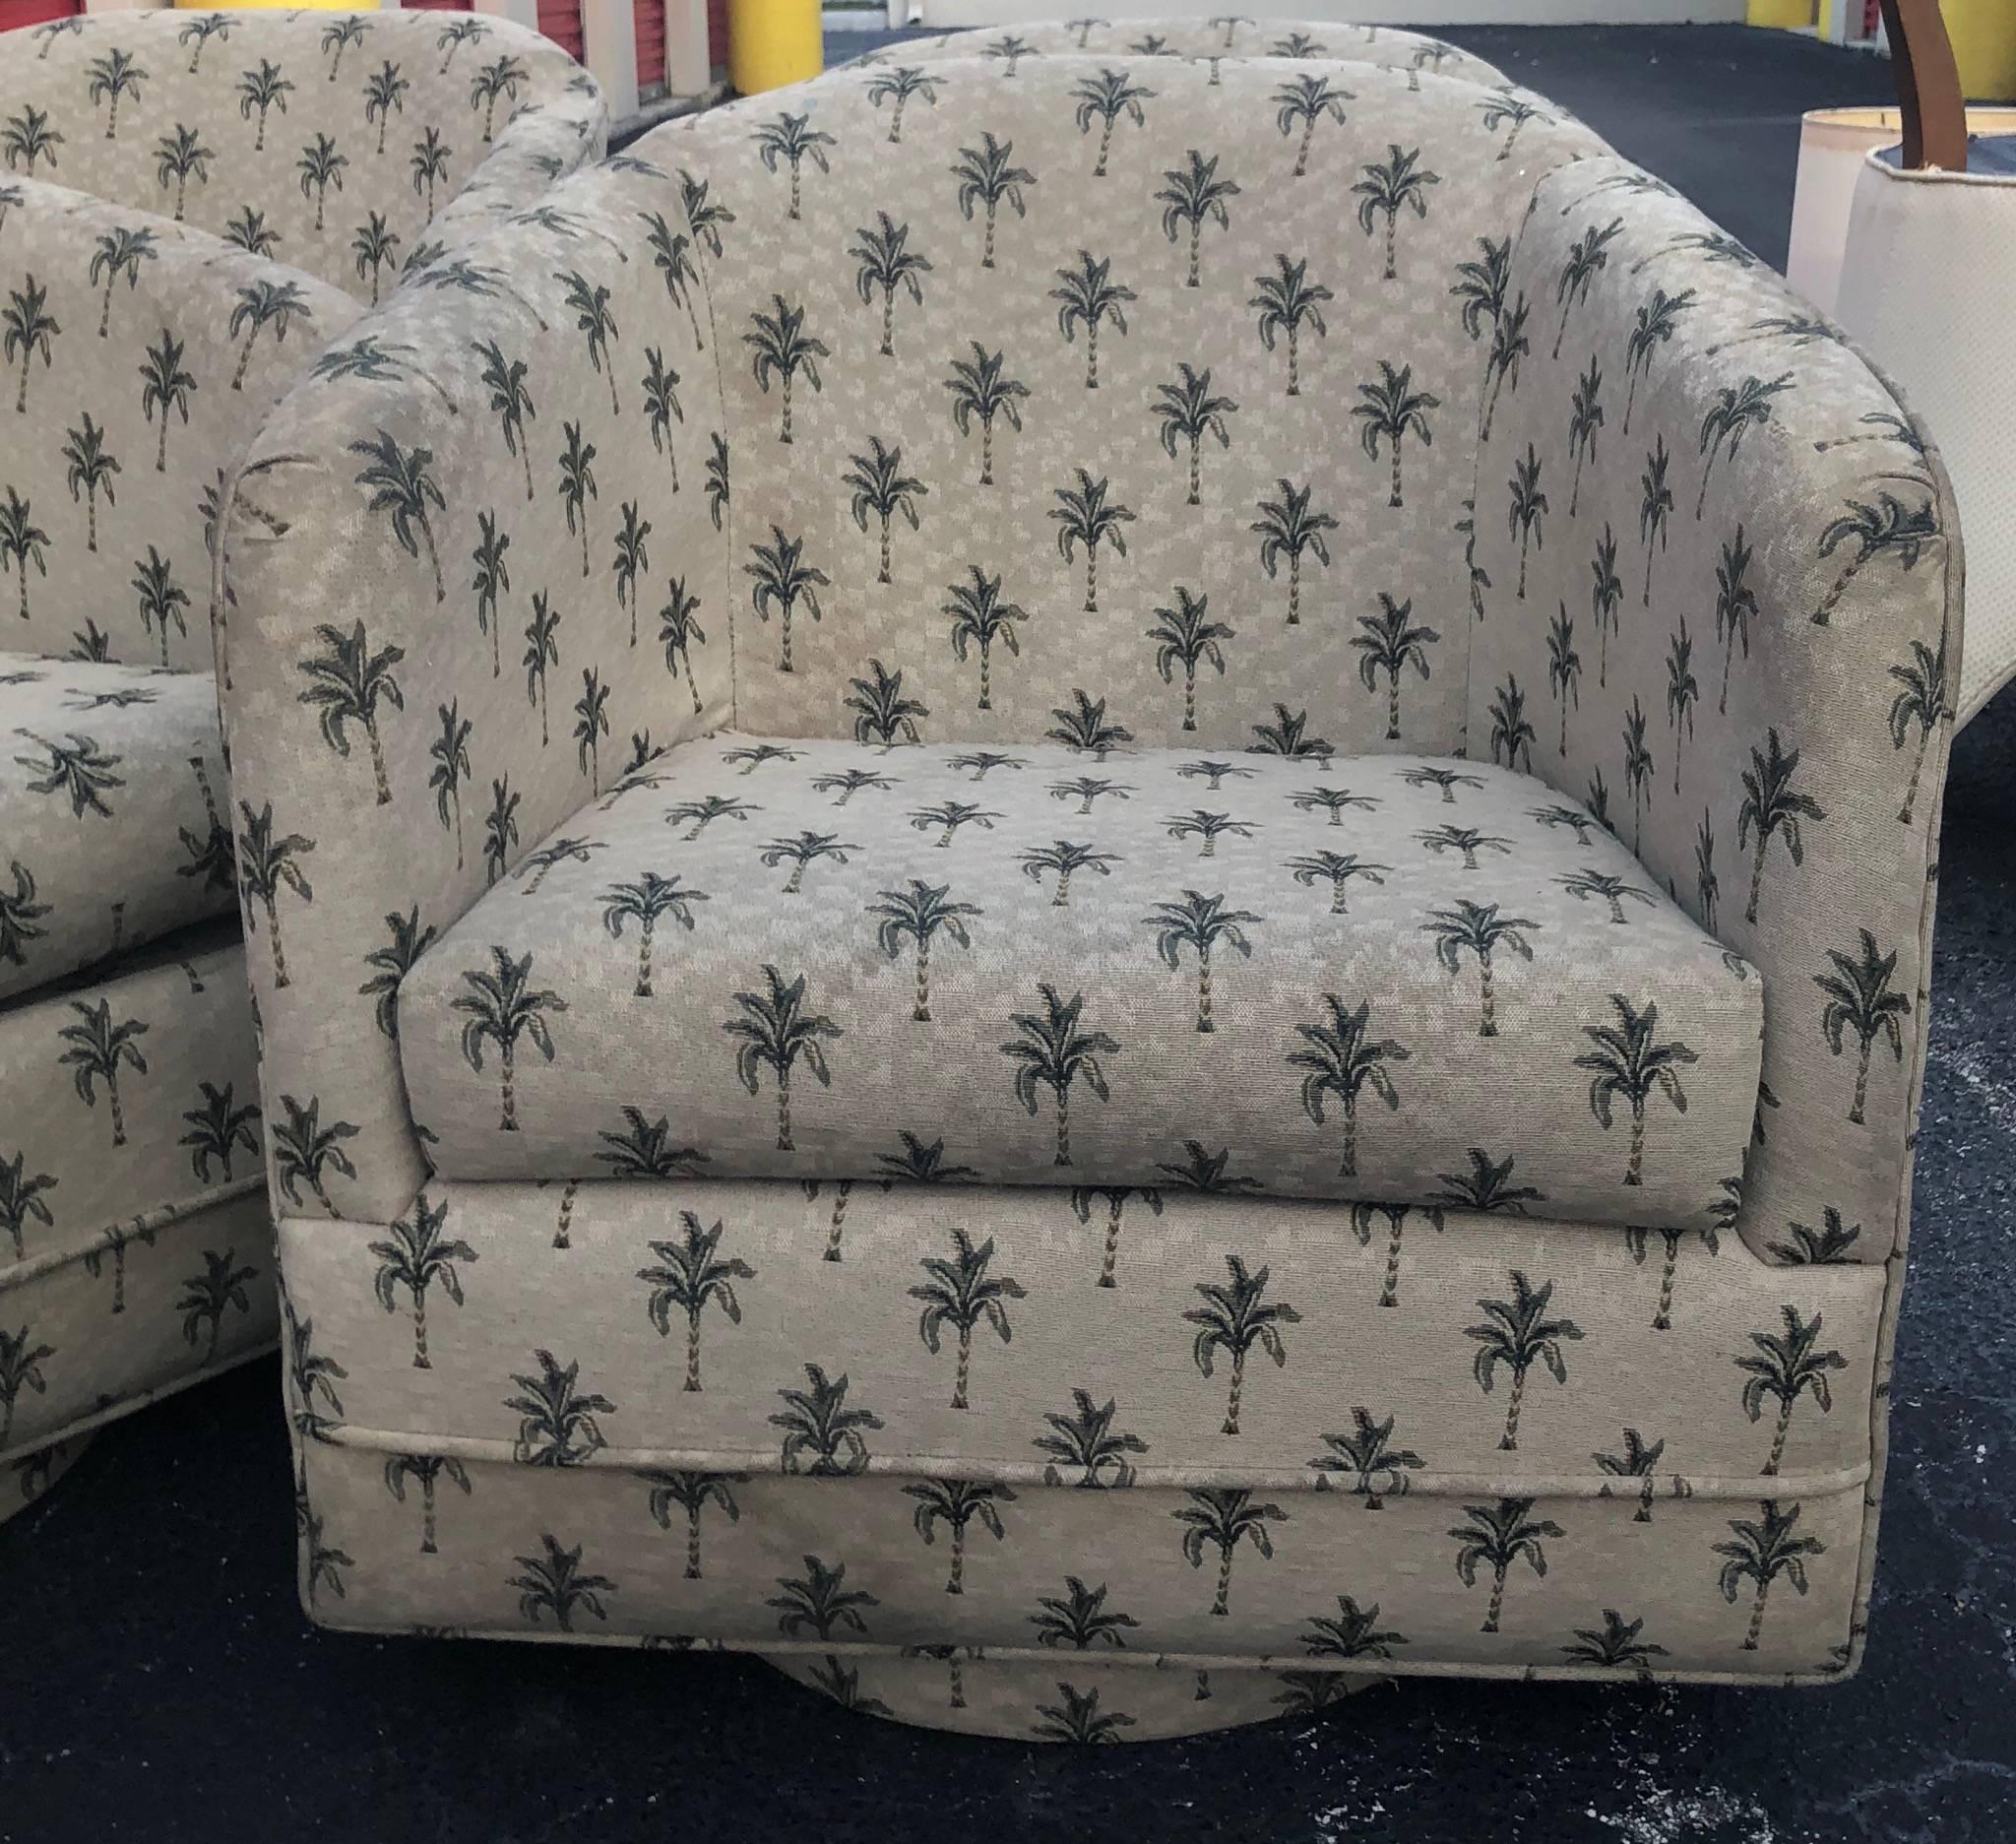 Set of four Swivel armchairs, Barrel tub with round circular platform base. The four are identical. These must be reupholstered as they have there original “as found” fabric which has stains.